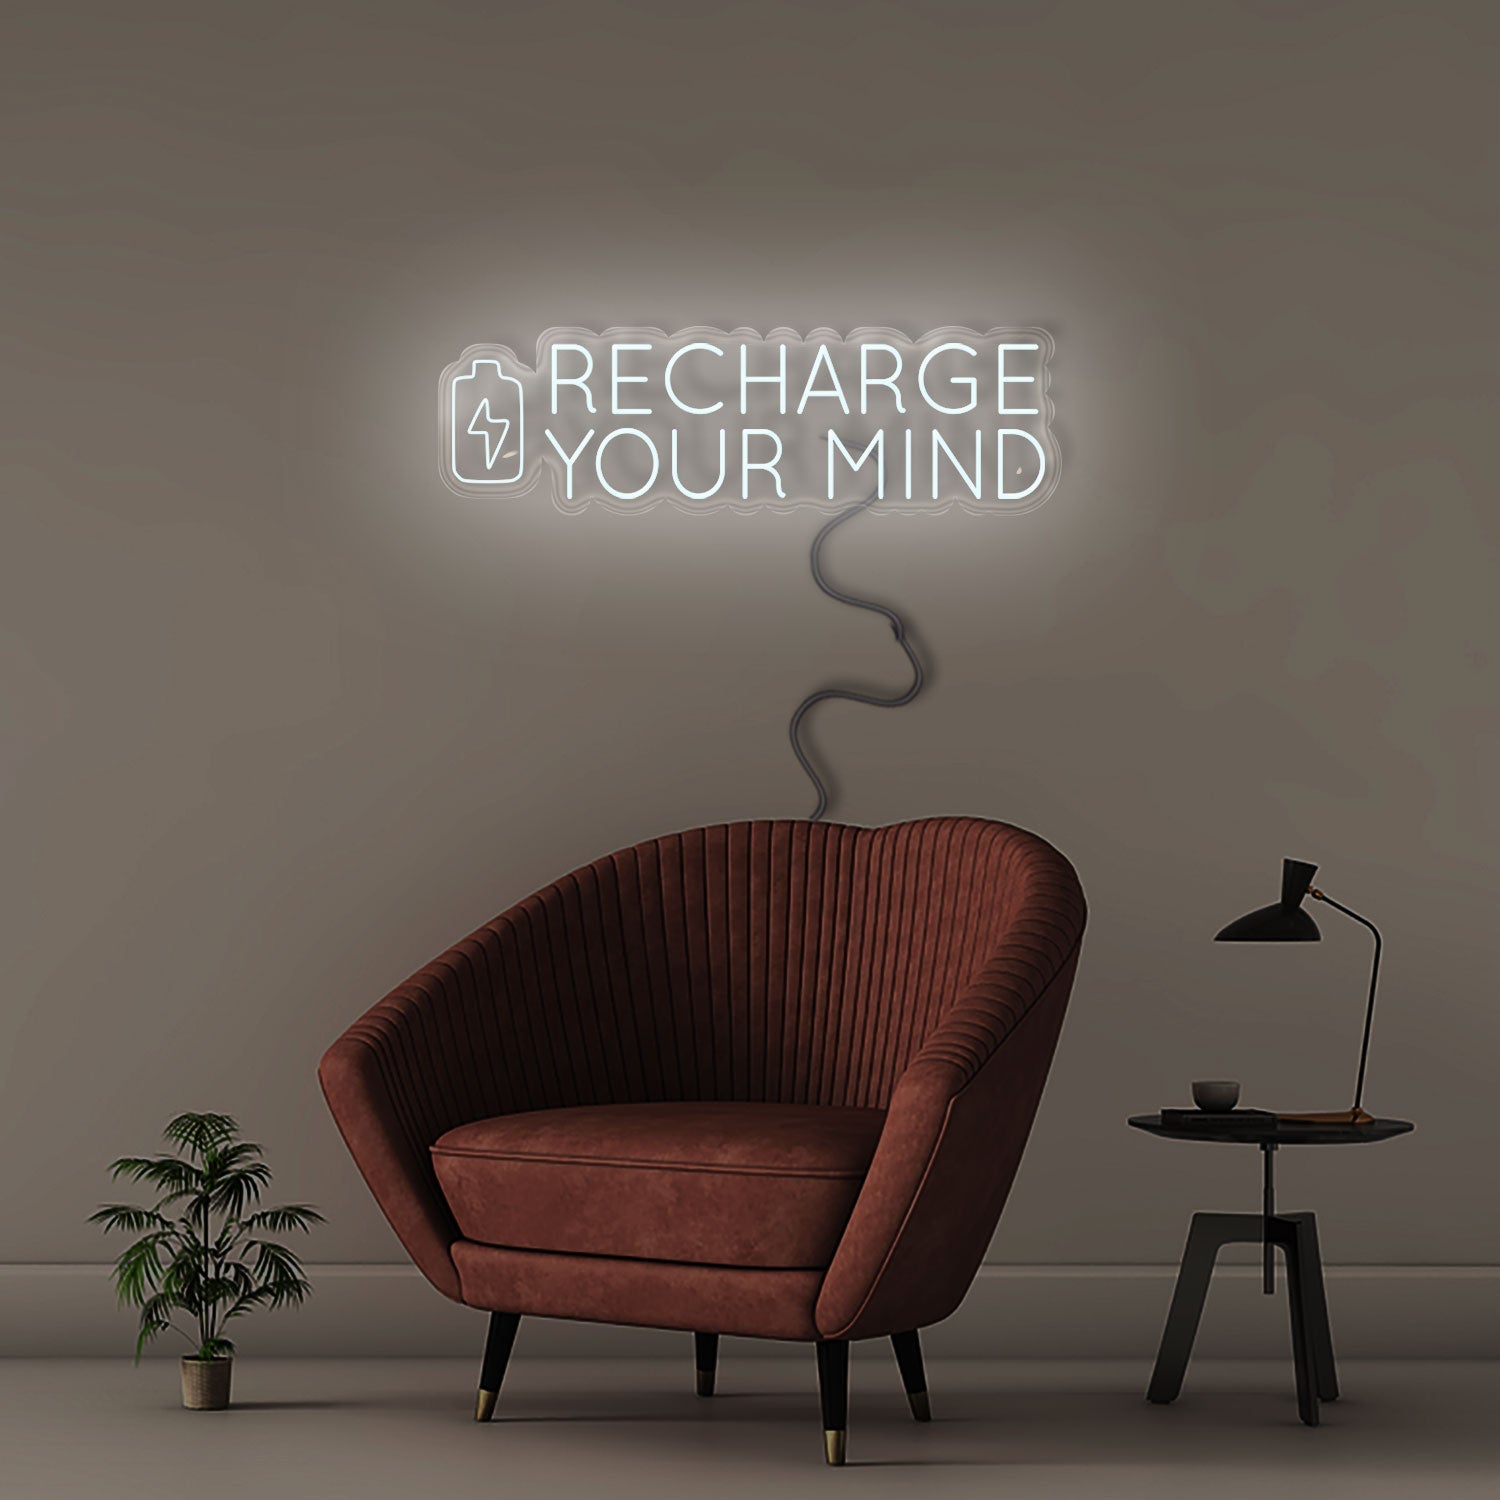 Recharge Your Mind